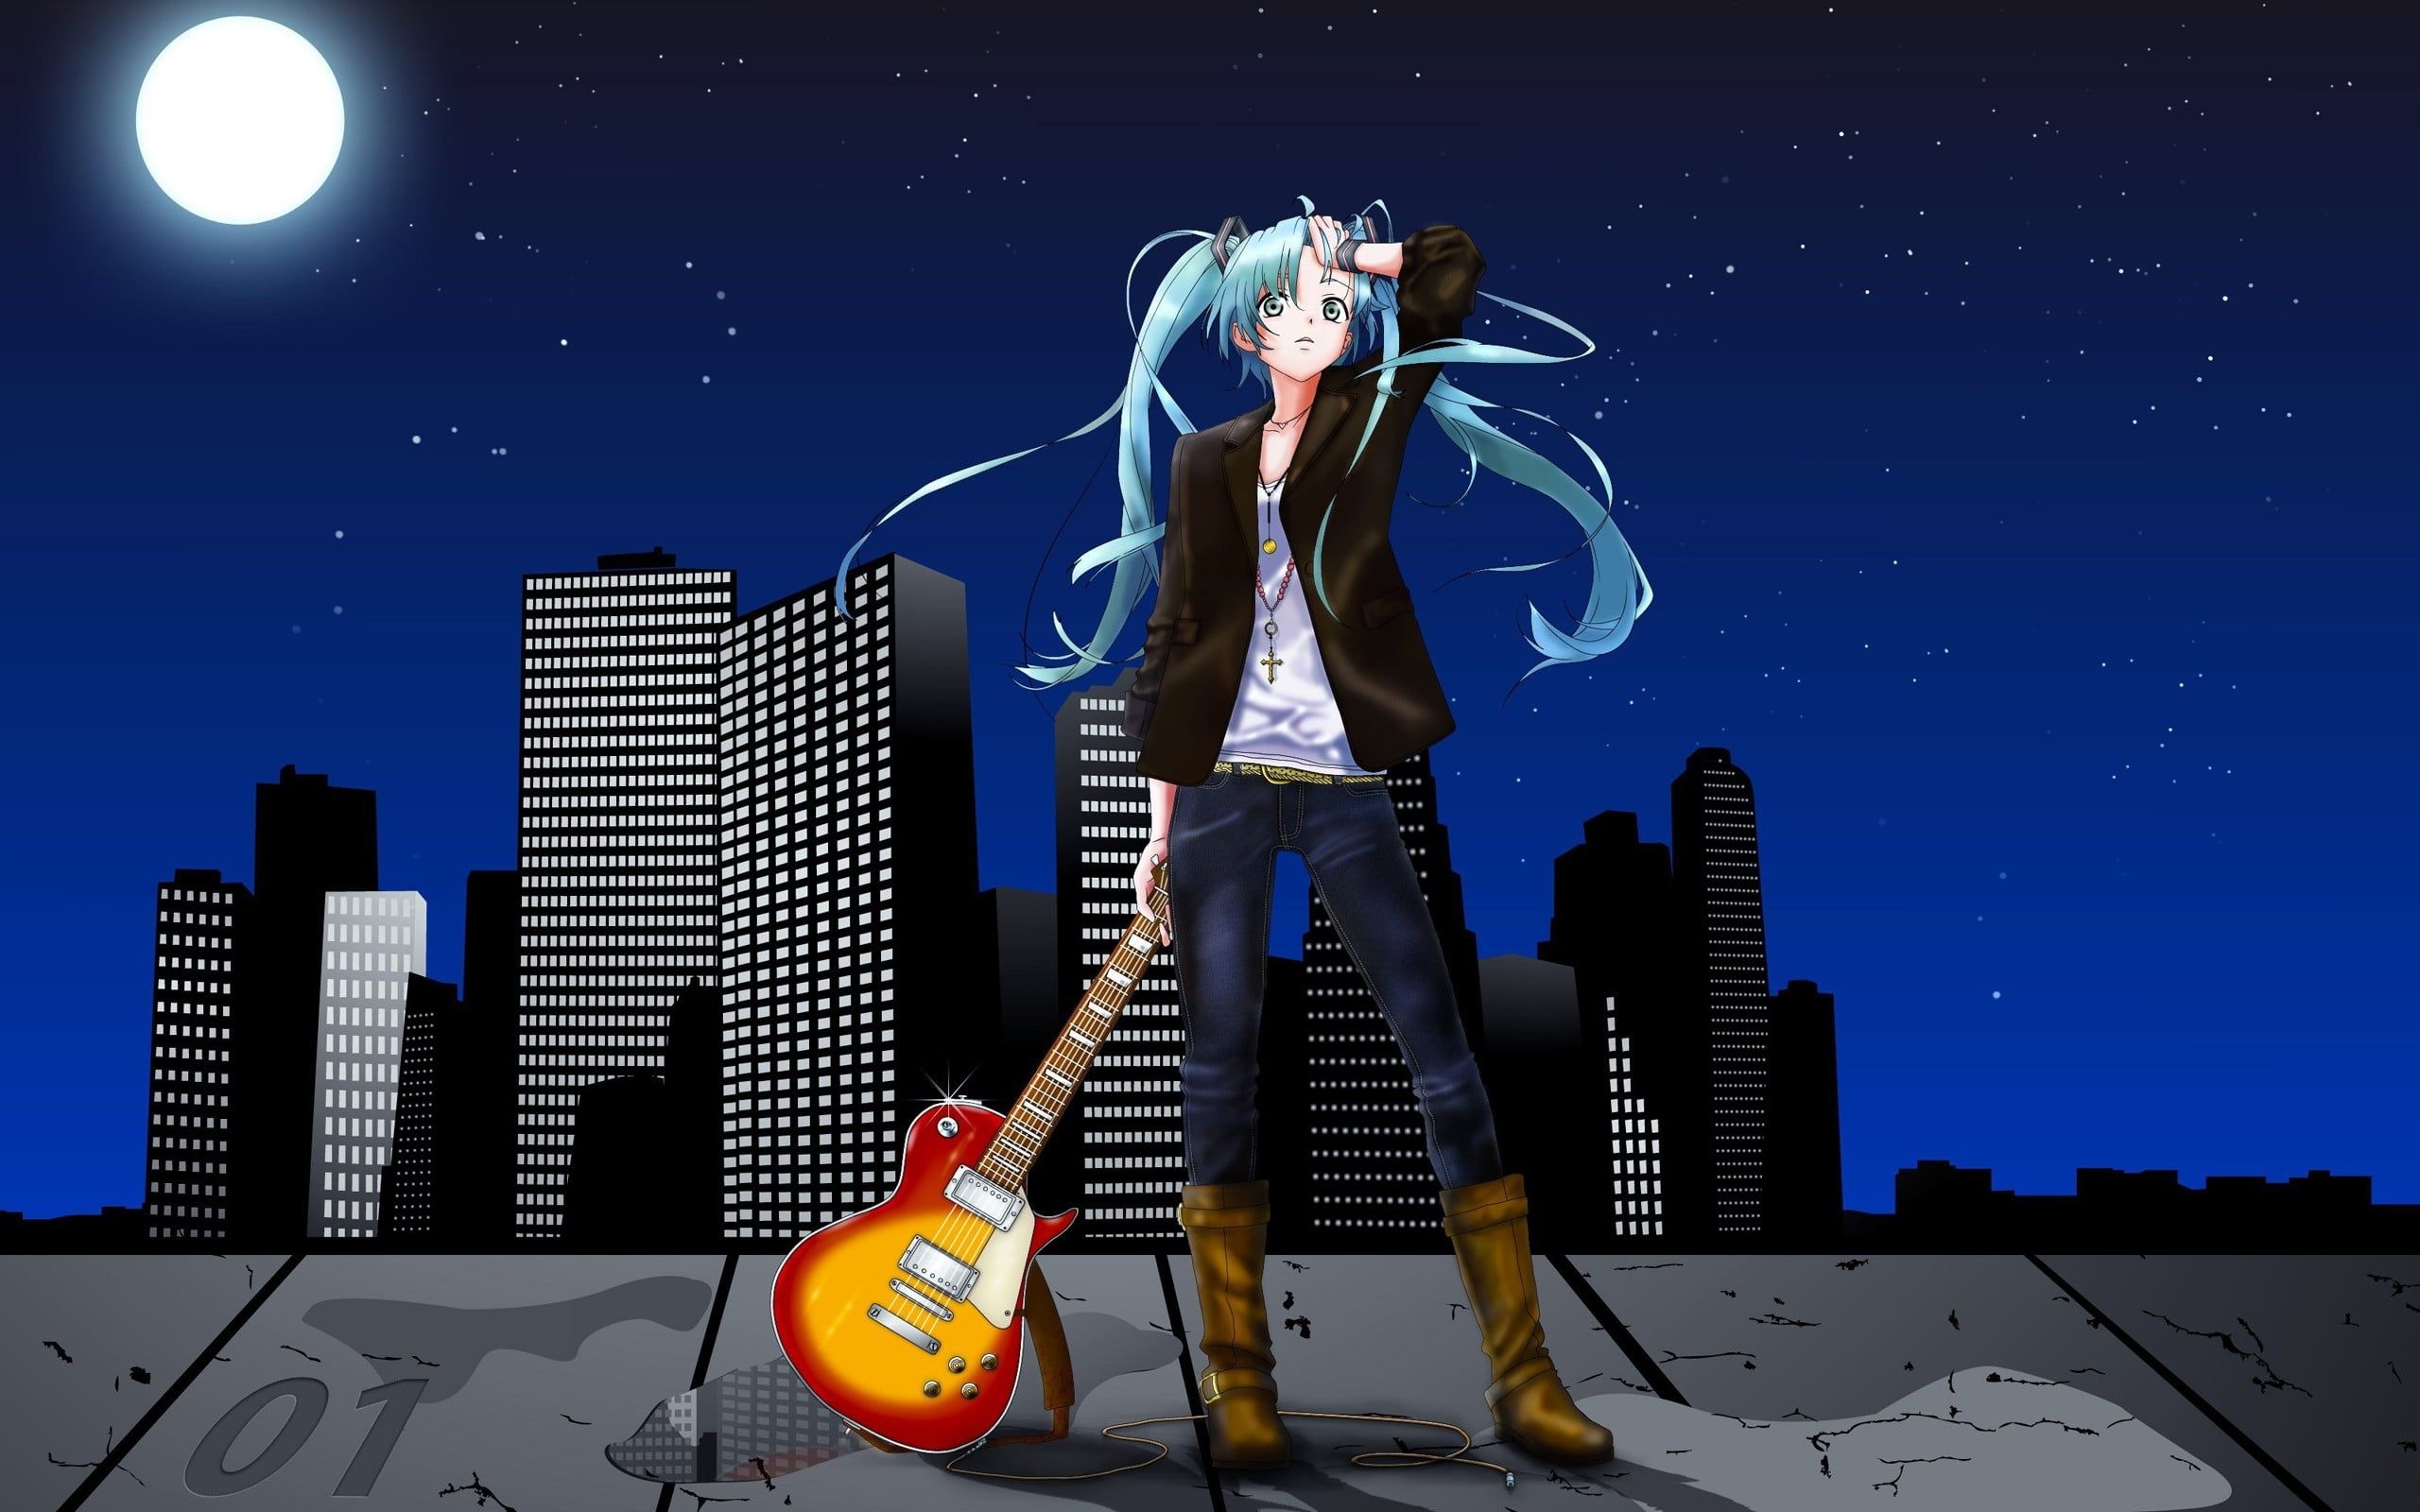 Hatsune Miku holding red and yellow electric guitar overlooking